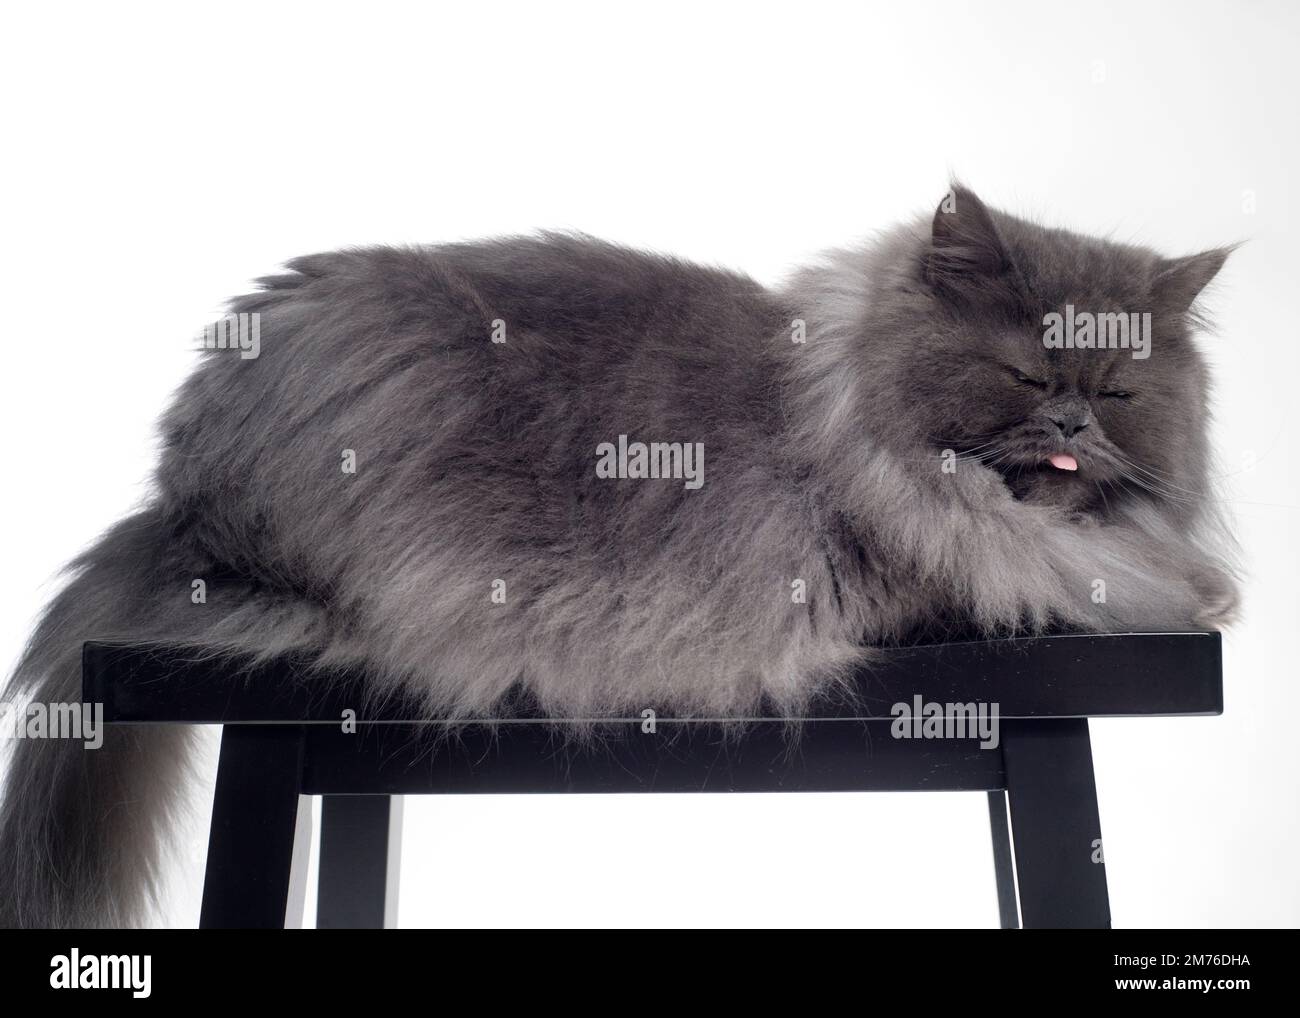 Funny picture of a fluffy grey cat sticking his tongue out looking grumpy. Stock Photo